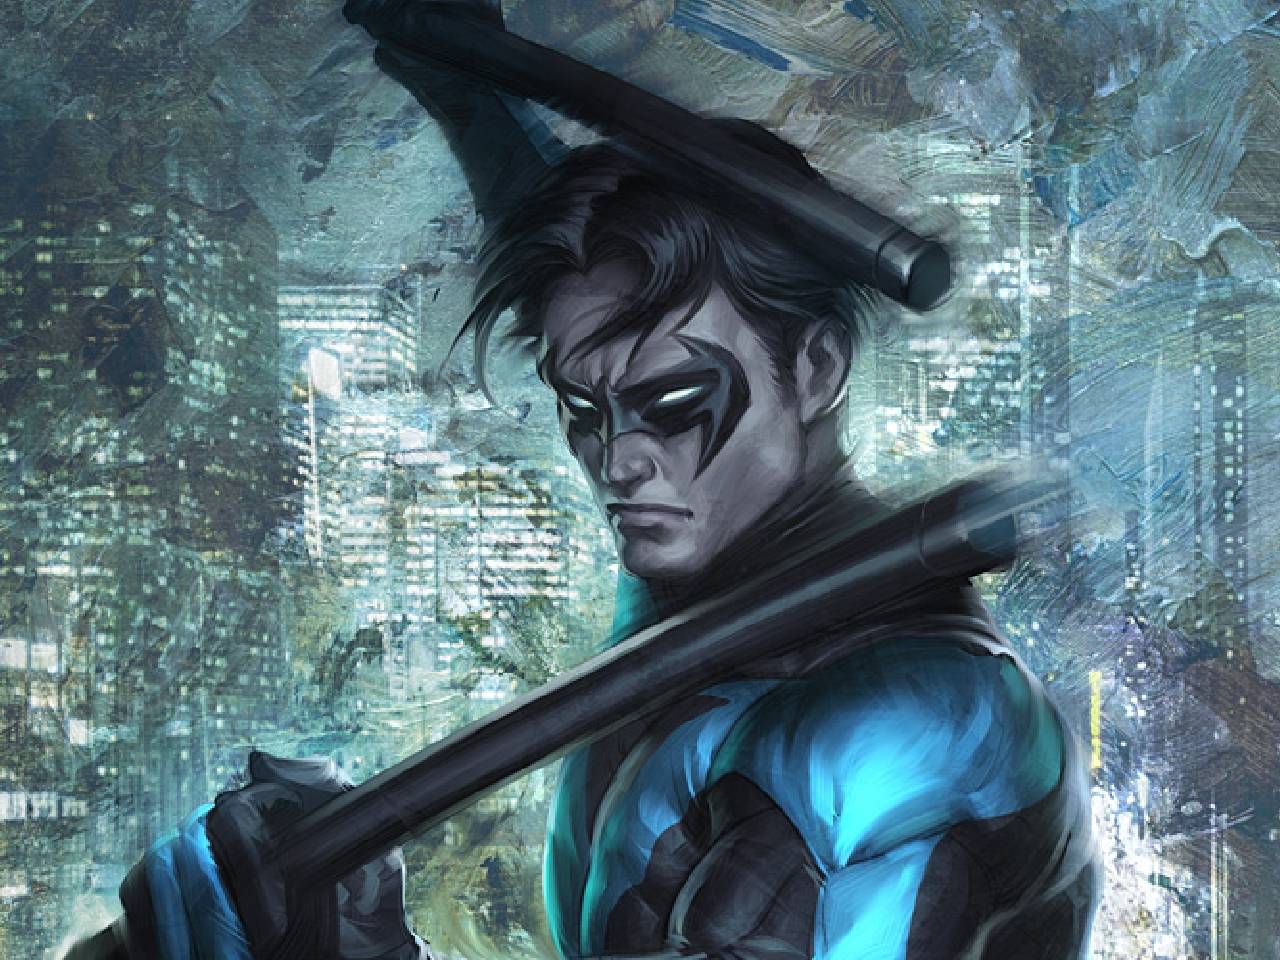 Nightwing Wallpaper for PC, Mobile